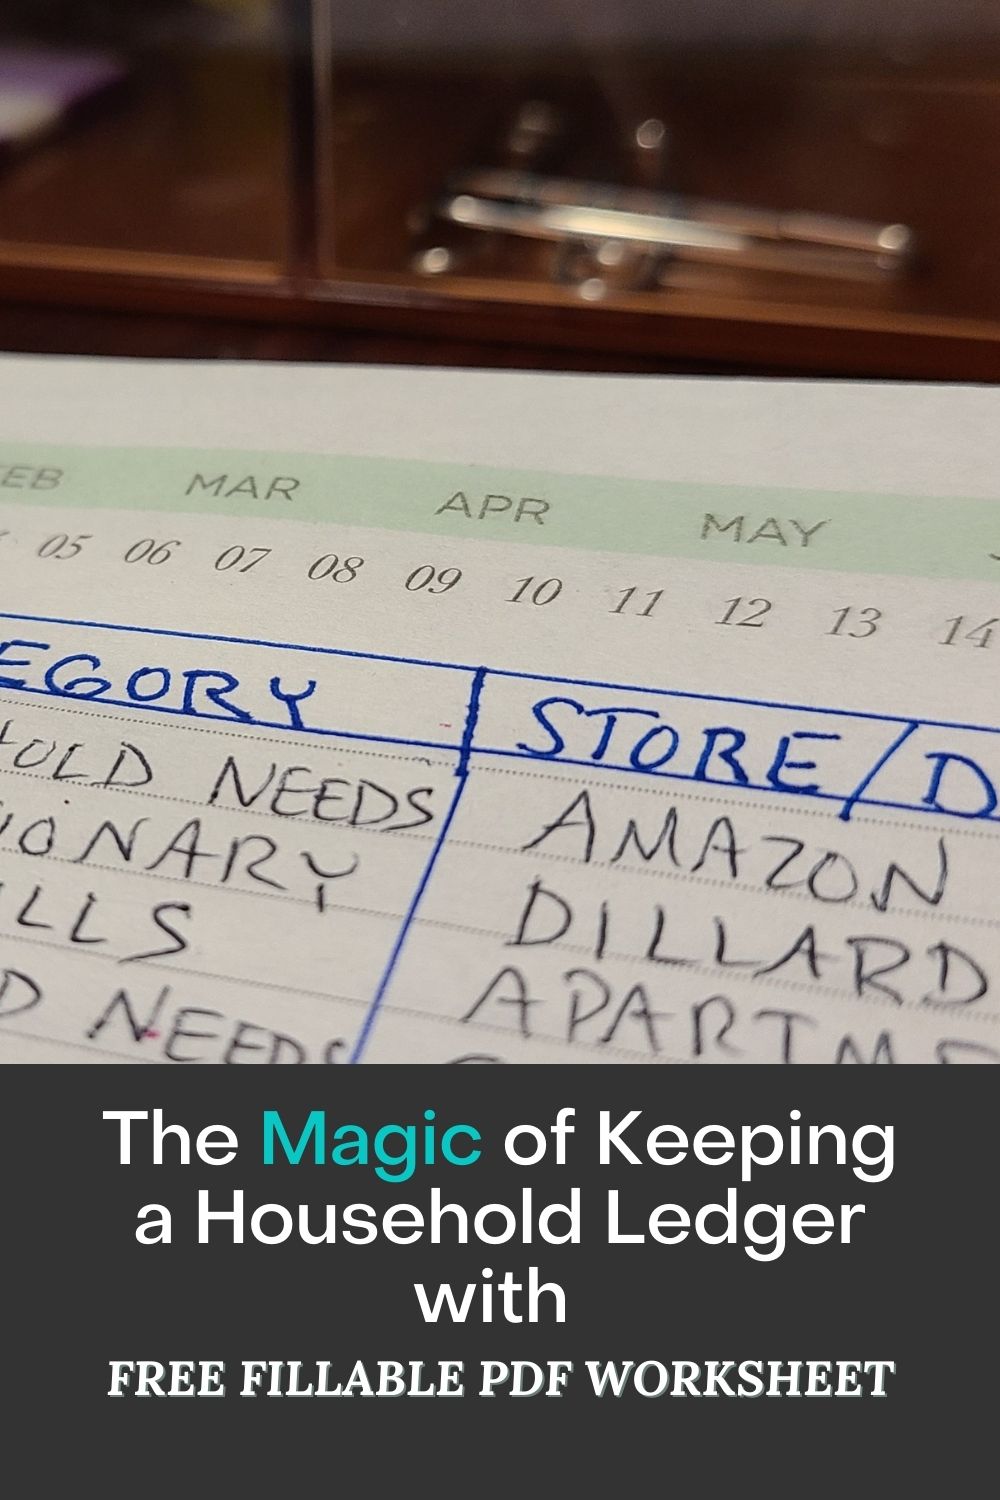 The Magic of Keeping a Household Ledger